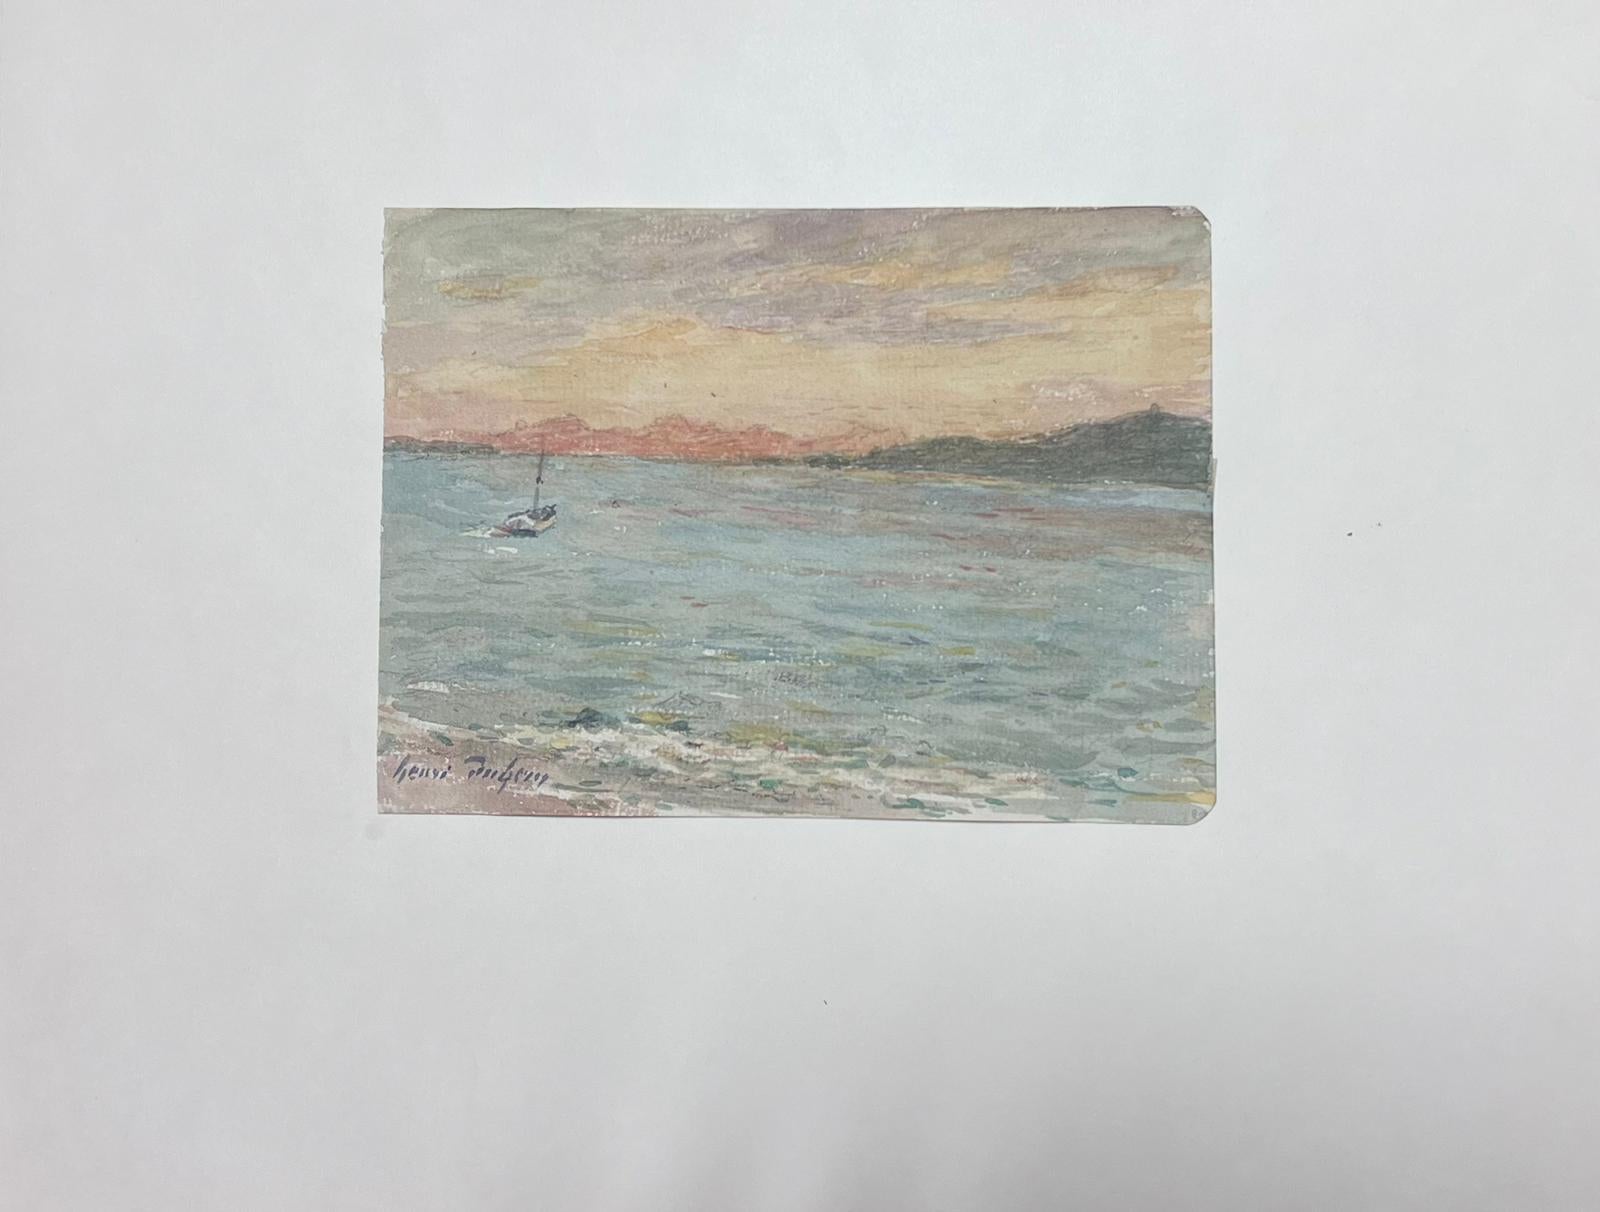 The artist: 
Henri Aime Duhem (1860-1941) French *see notes below, signed 

Title: Sunset

Medium:  
signed gouache on paper, loosely laid over card, unframed

card: 10 x 12.75 inches
painting: 5 x 6.5 inches

Provenance: 
private collection of this